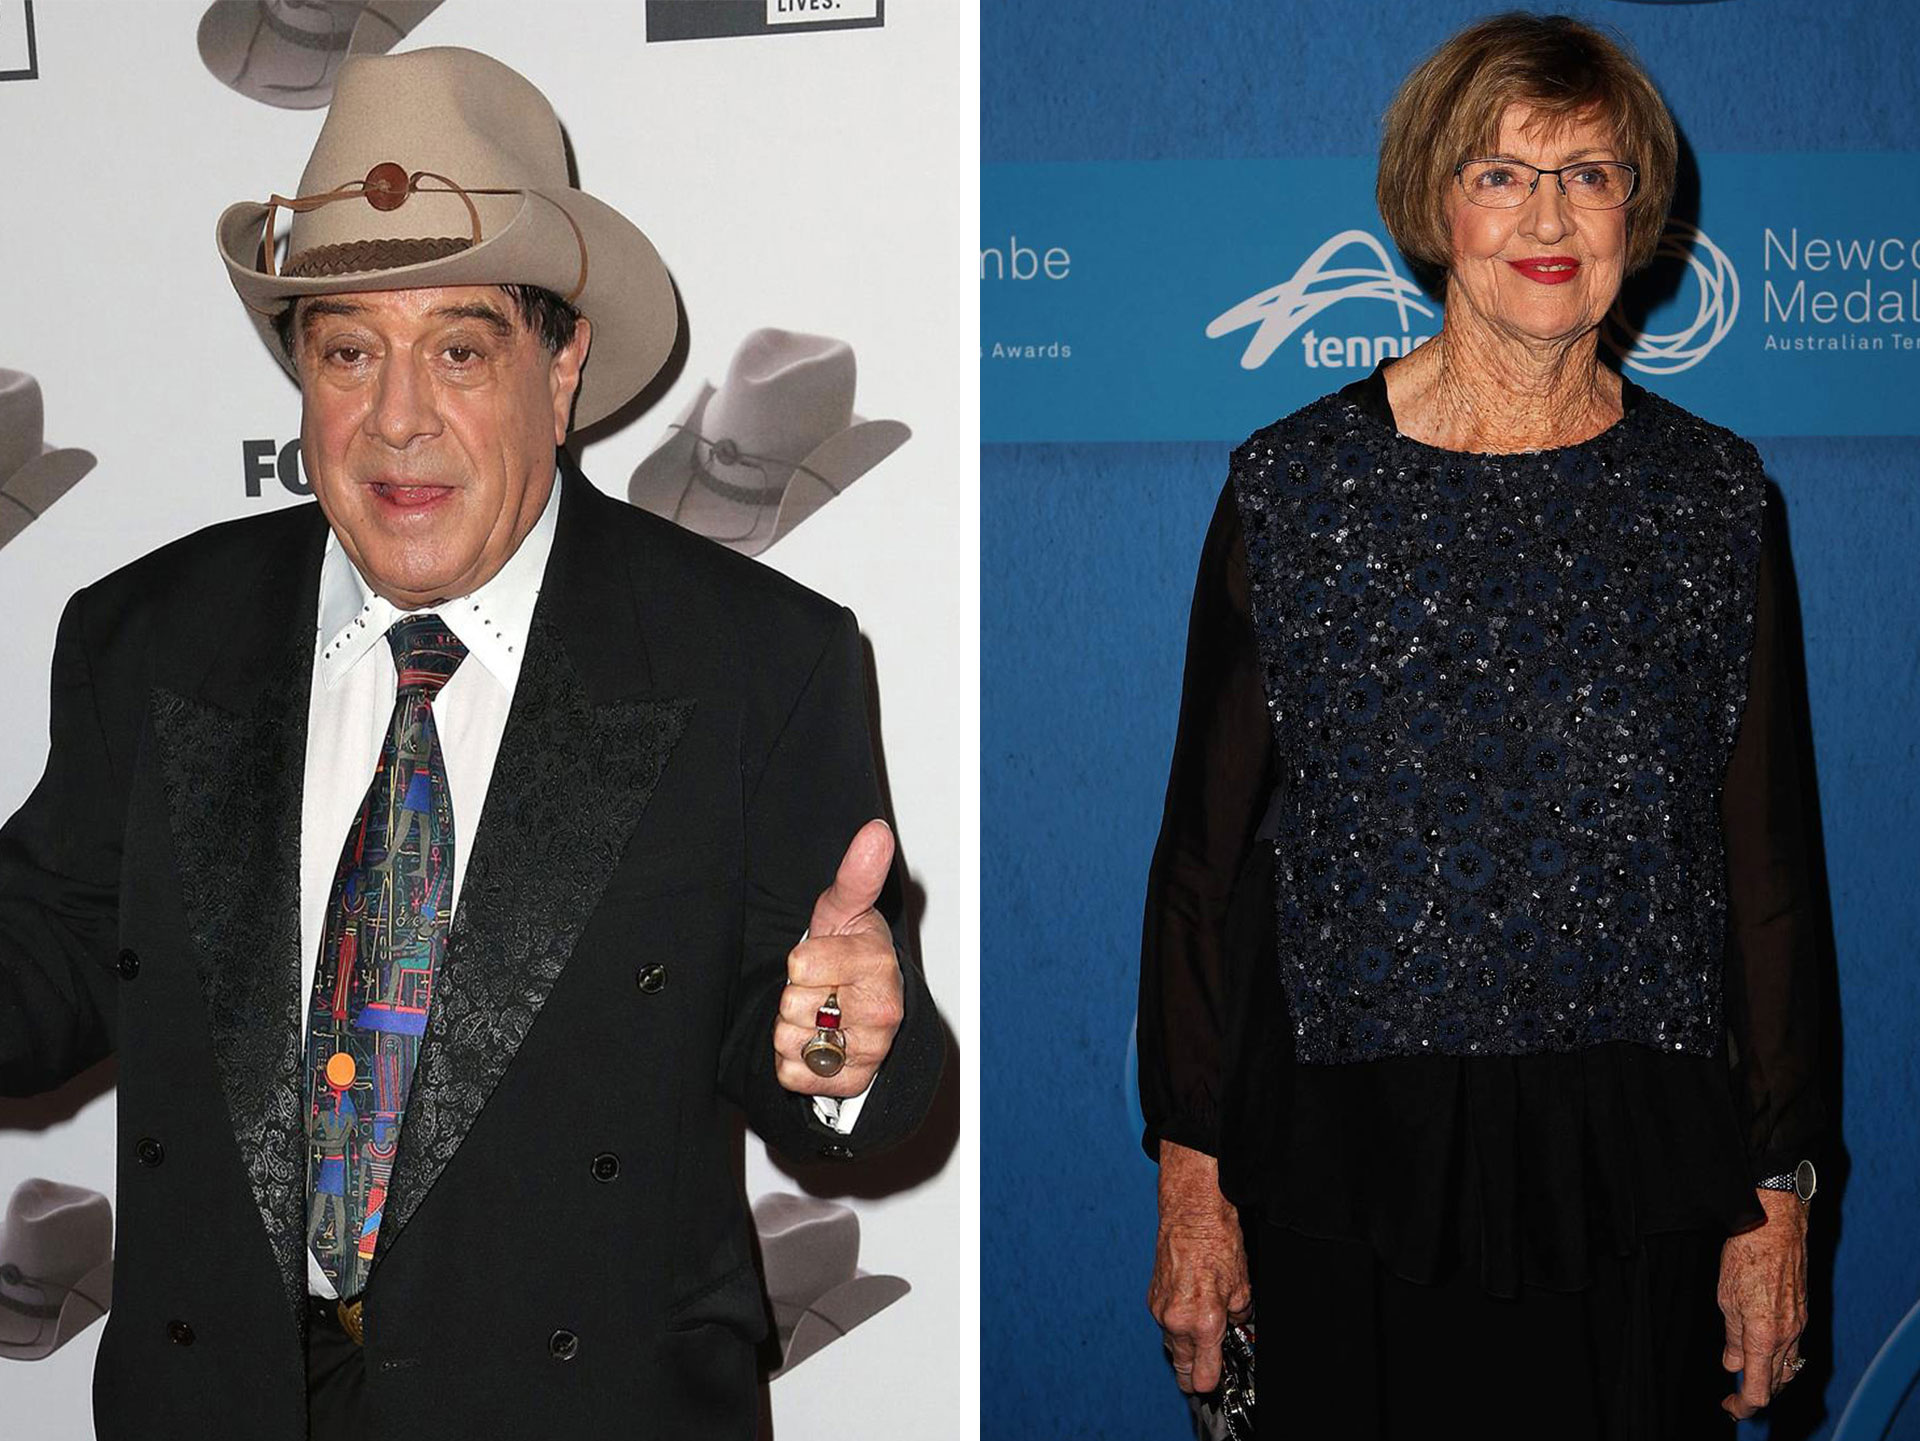 Molly Meldrum wants Margaret Court Arena to be renamed